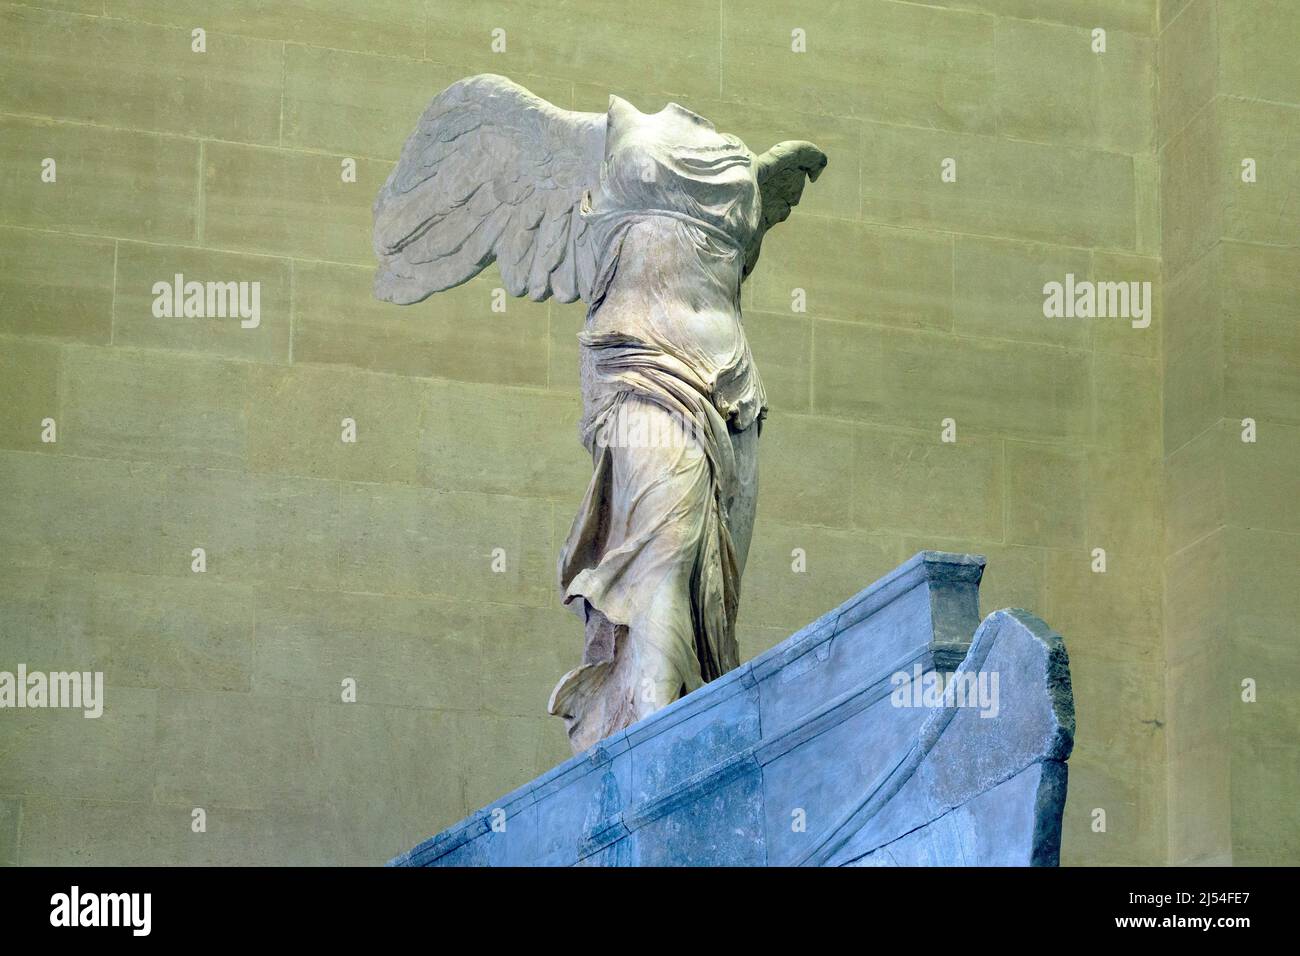 Winged Victory of Samothrace, Ancient Greek Marble Sculpture, Musee du Louvre, Paris, France Stock Photo